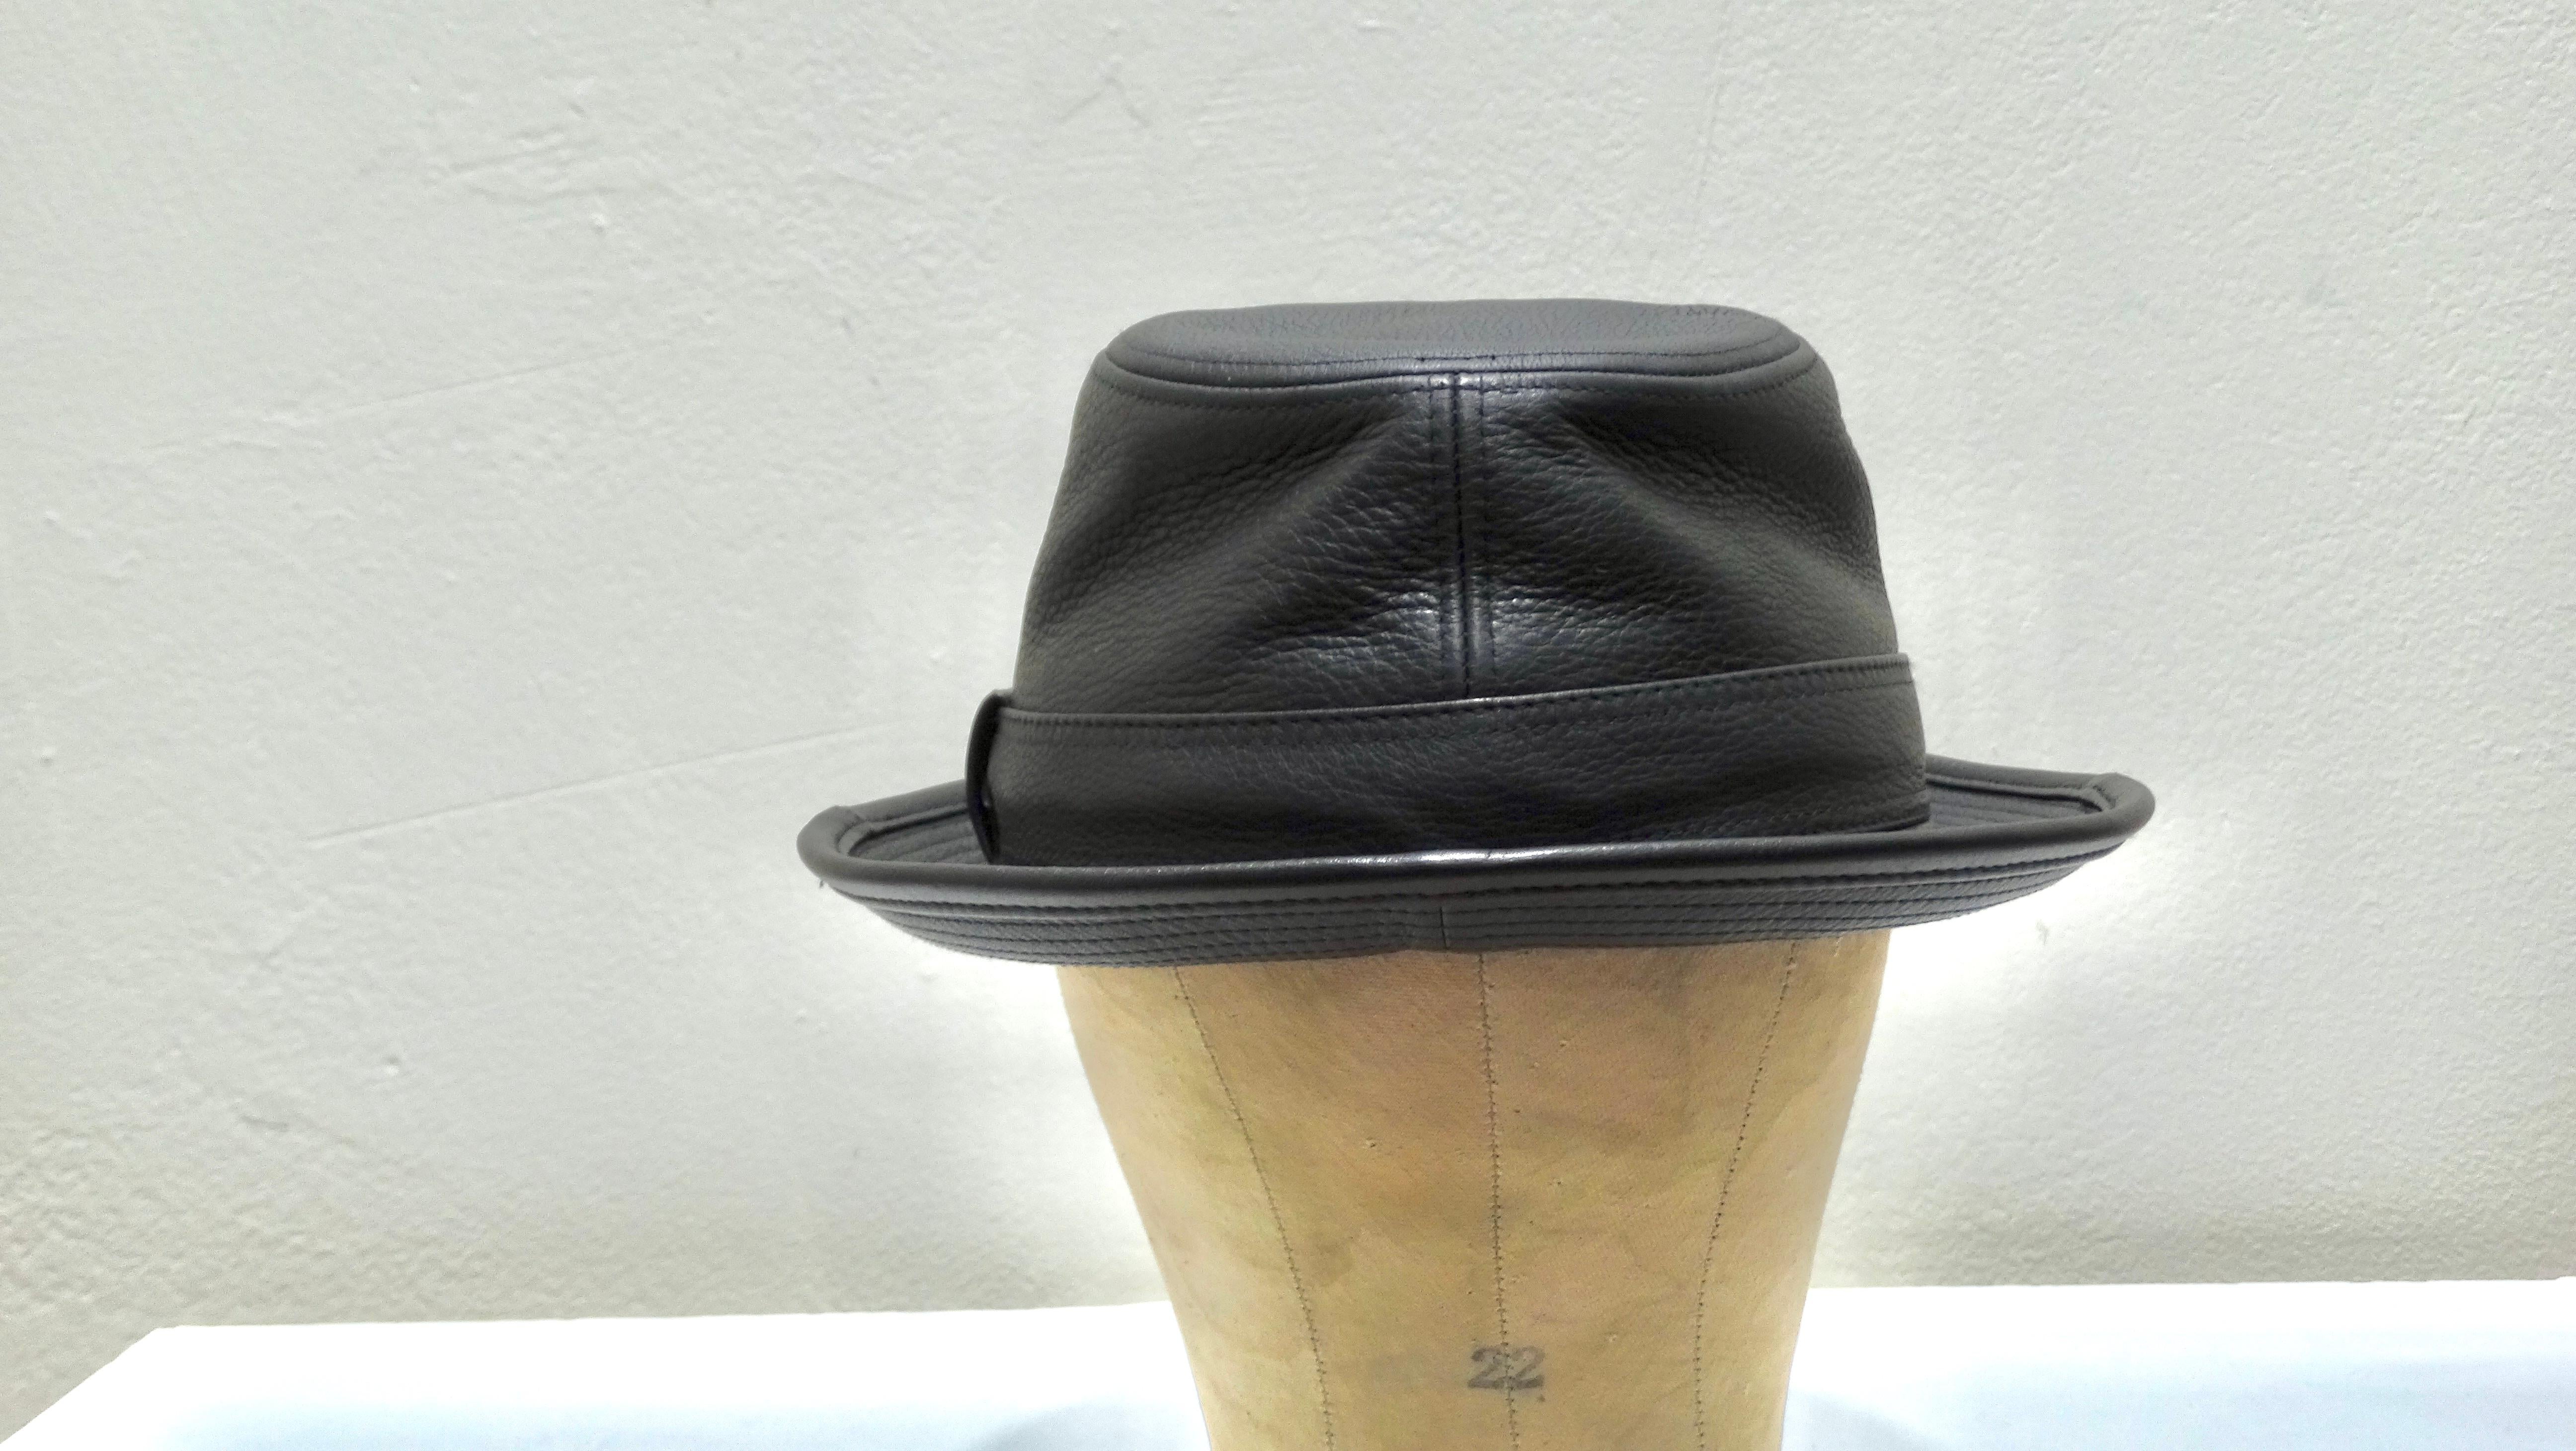  This Hermes Clémence Leather Hat In Black Taurillon is perfect for anyone to add a layer of coverage while still maintaining a sleek and stylish look. With this classic Hermes leather hat, your are sure to be noticed strolling down the street. This